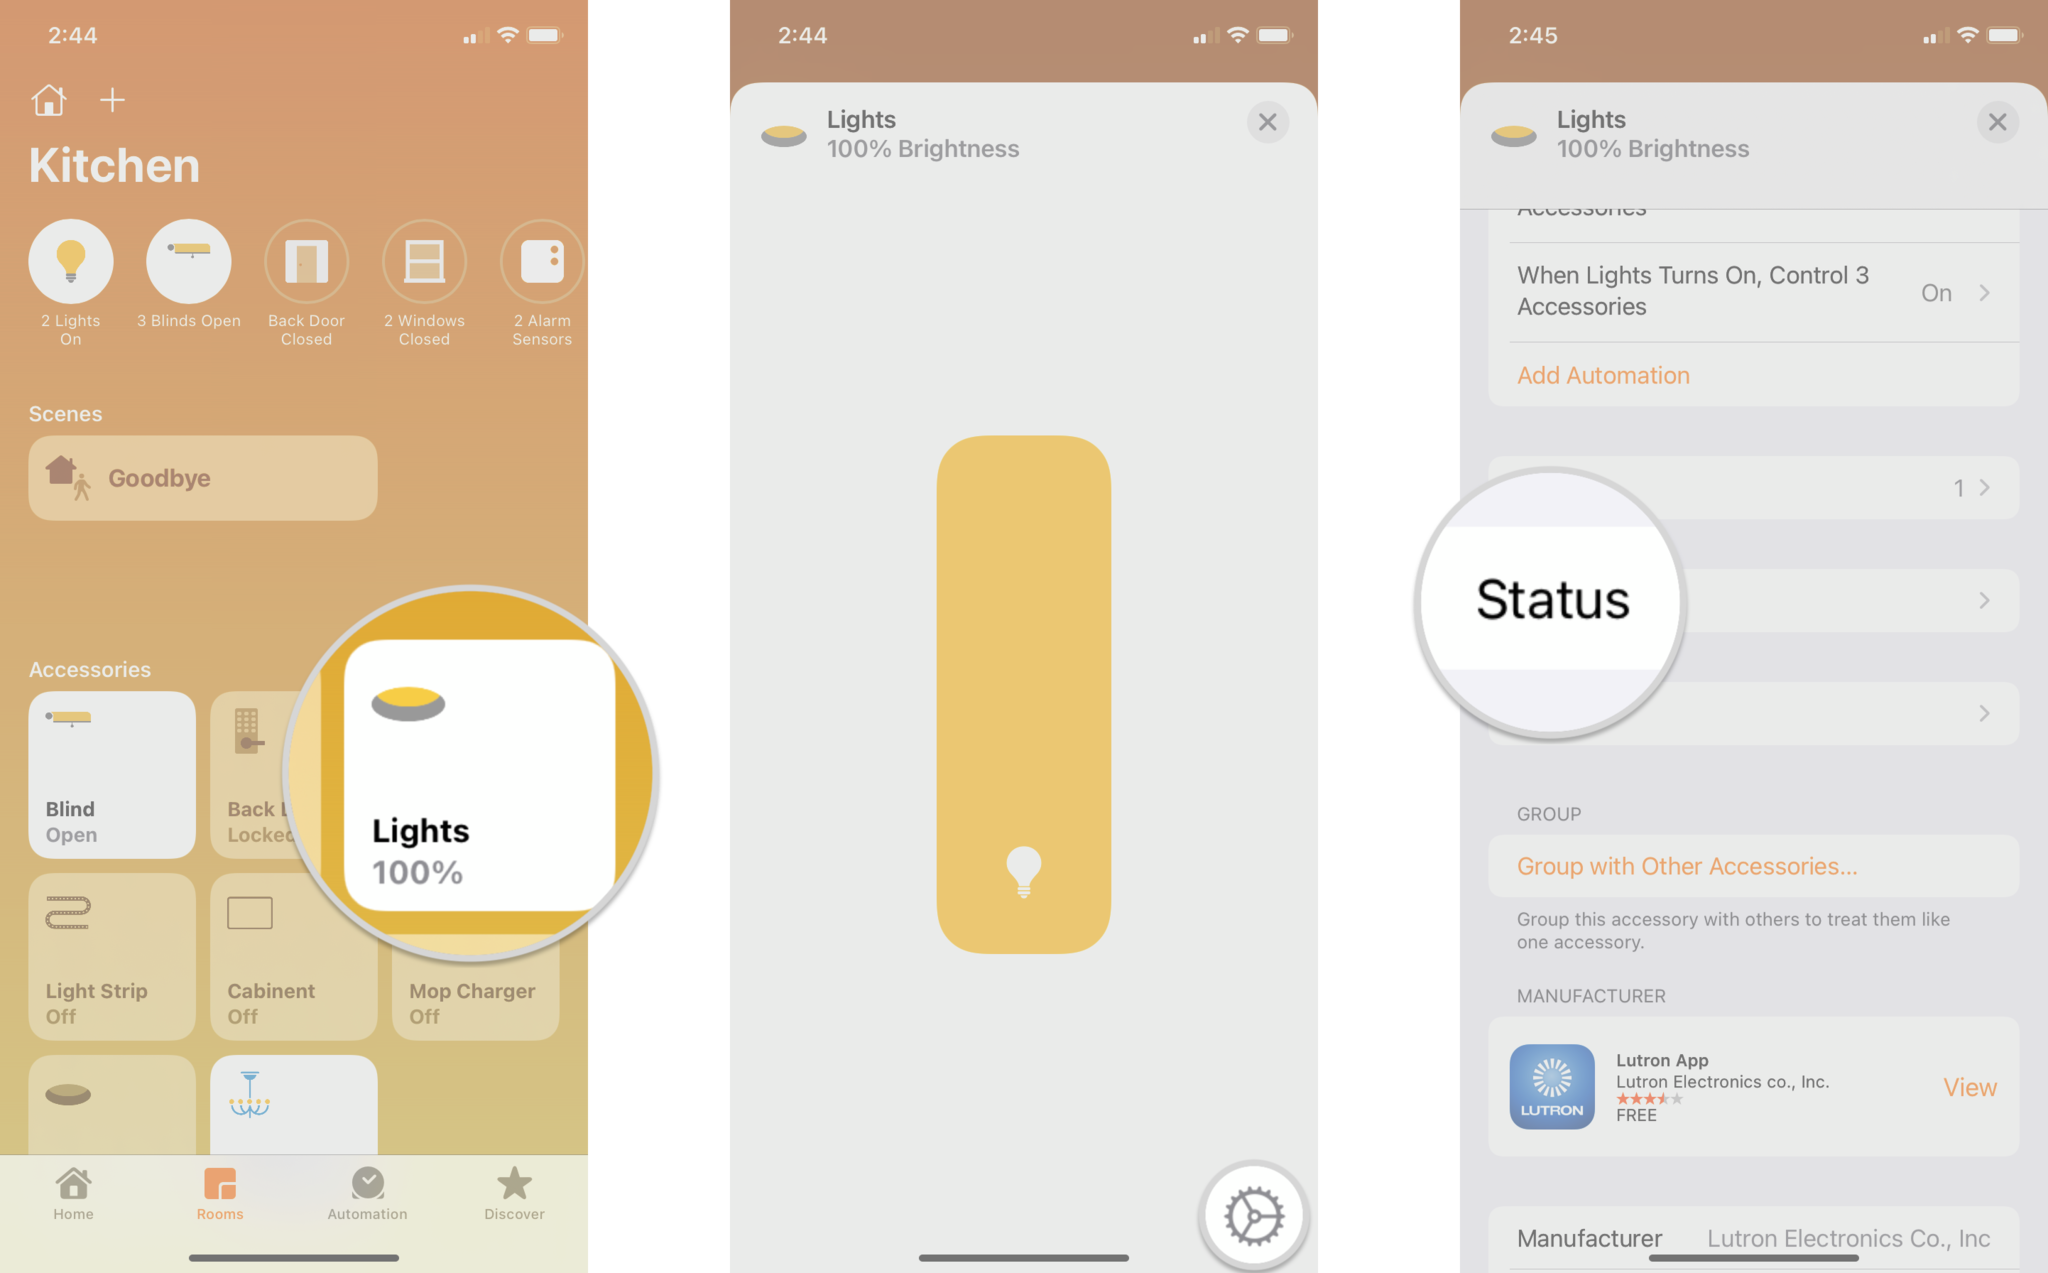 How to monitor and adjust the status of HomeKit accessories on an iPhone by showing steps: Tap and hold on an Accessory, Tap the Settings icon, Tap Status